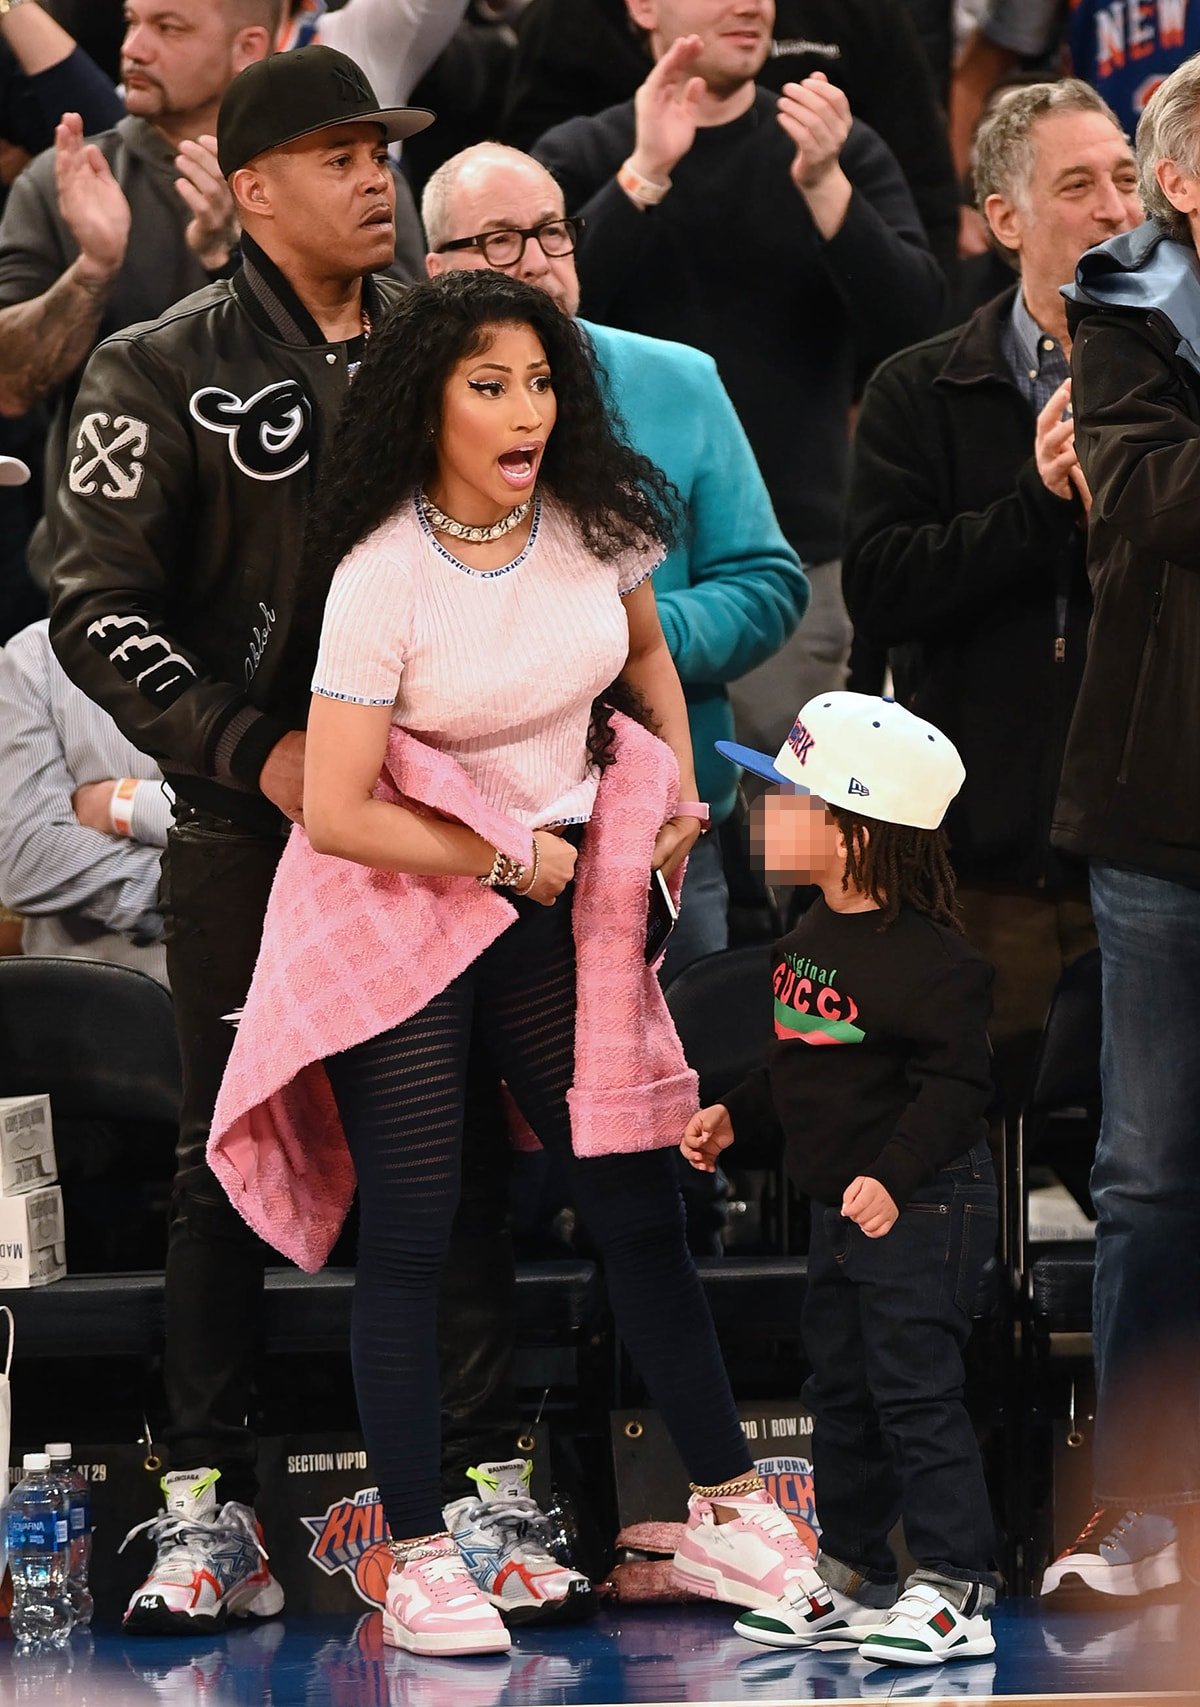 Nicki Minaj looks comfy in a pink Chanel tee, black Alaia sheer striped leggings, and sneakers as she celebrates Easter Sunday with her husband, Kenneth Petty, and their son, Papa Bear, watching the New York Knicks game courtside